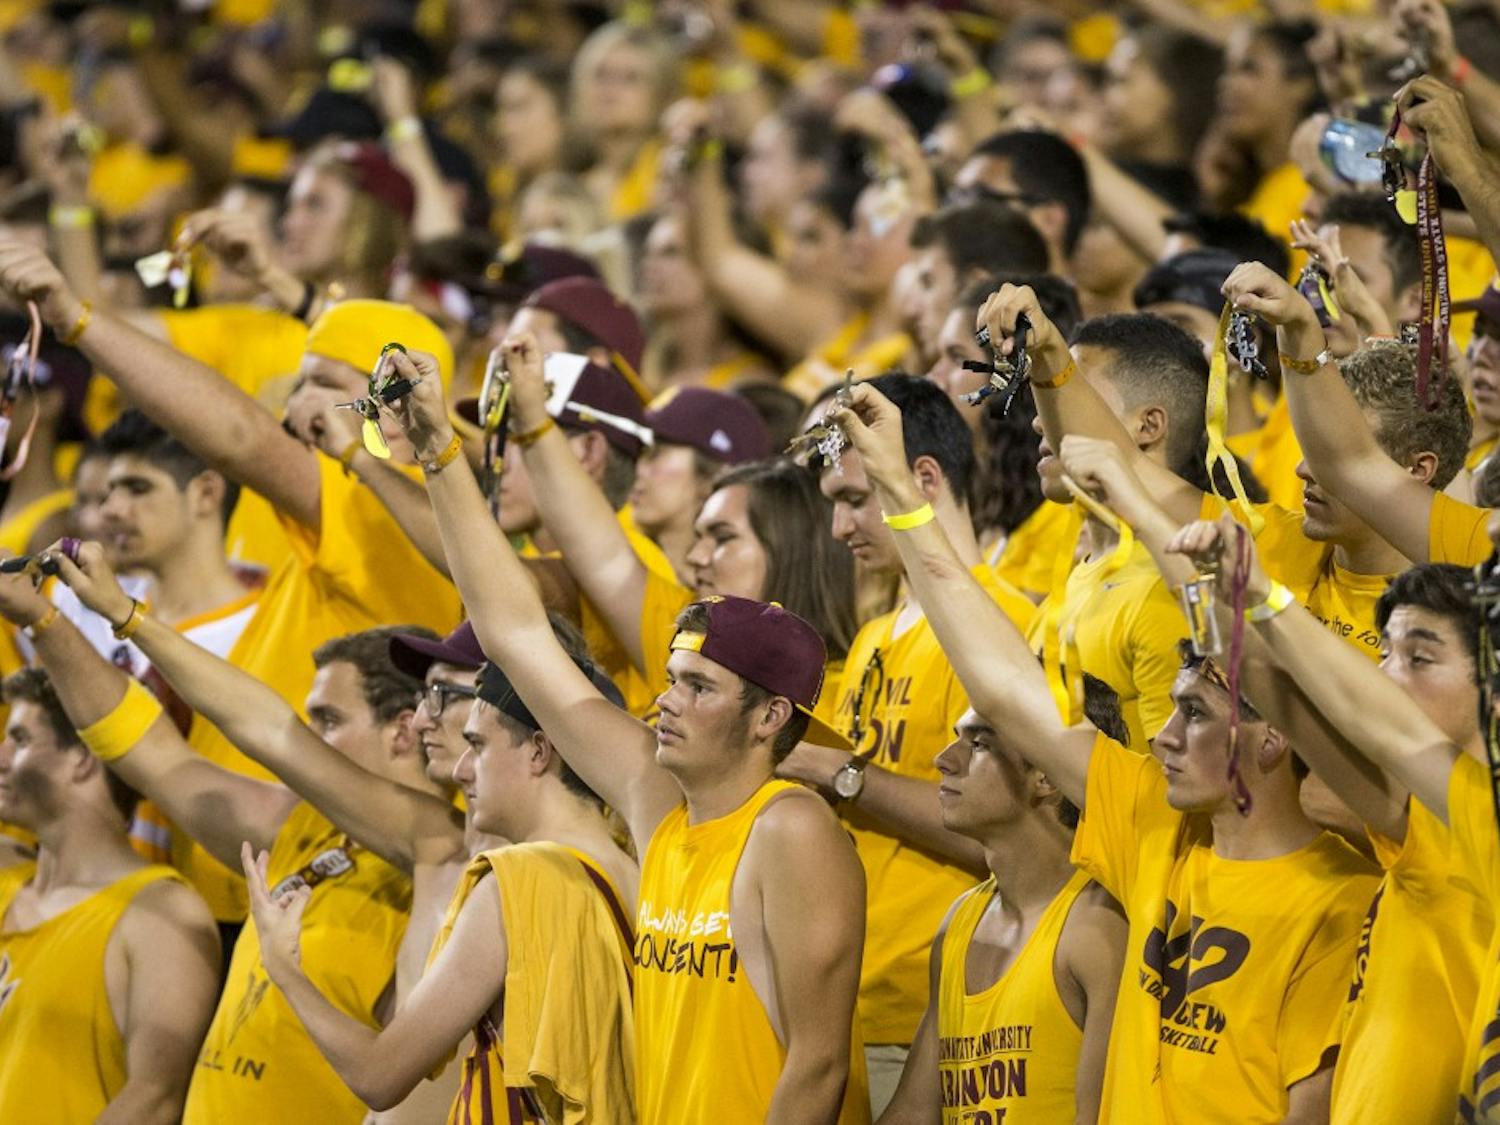 Students in the Inferno section wave their keys during a game against visiting Cal Poly at Sun Devil Stadium in Tempe on Saturday, Sept. 12, 2015. ASU beat Cal Poly 35-21 in their season opener. 